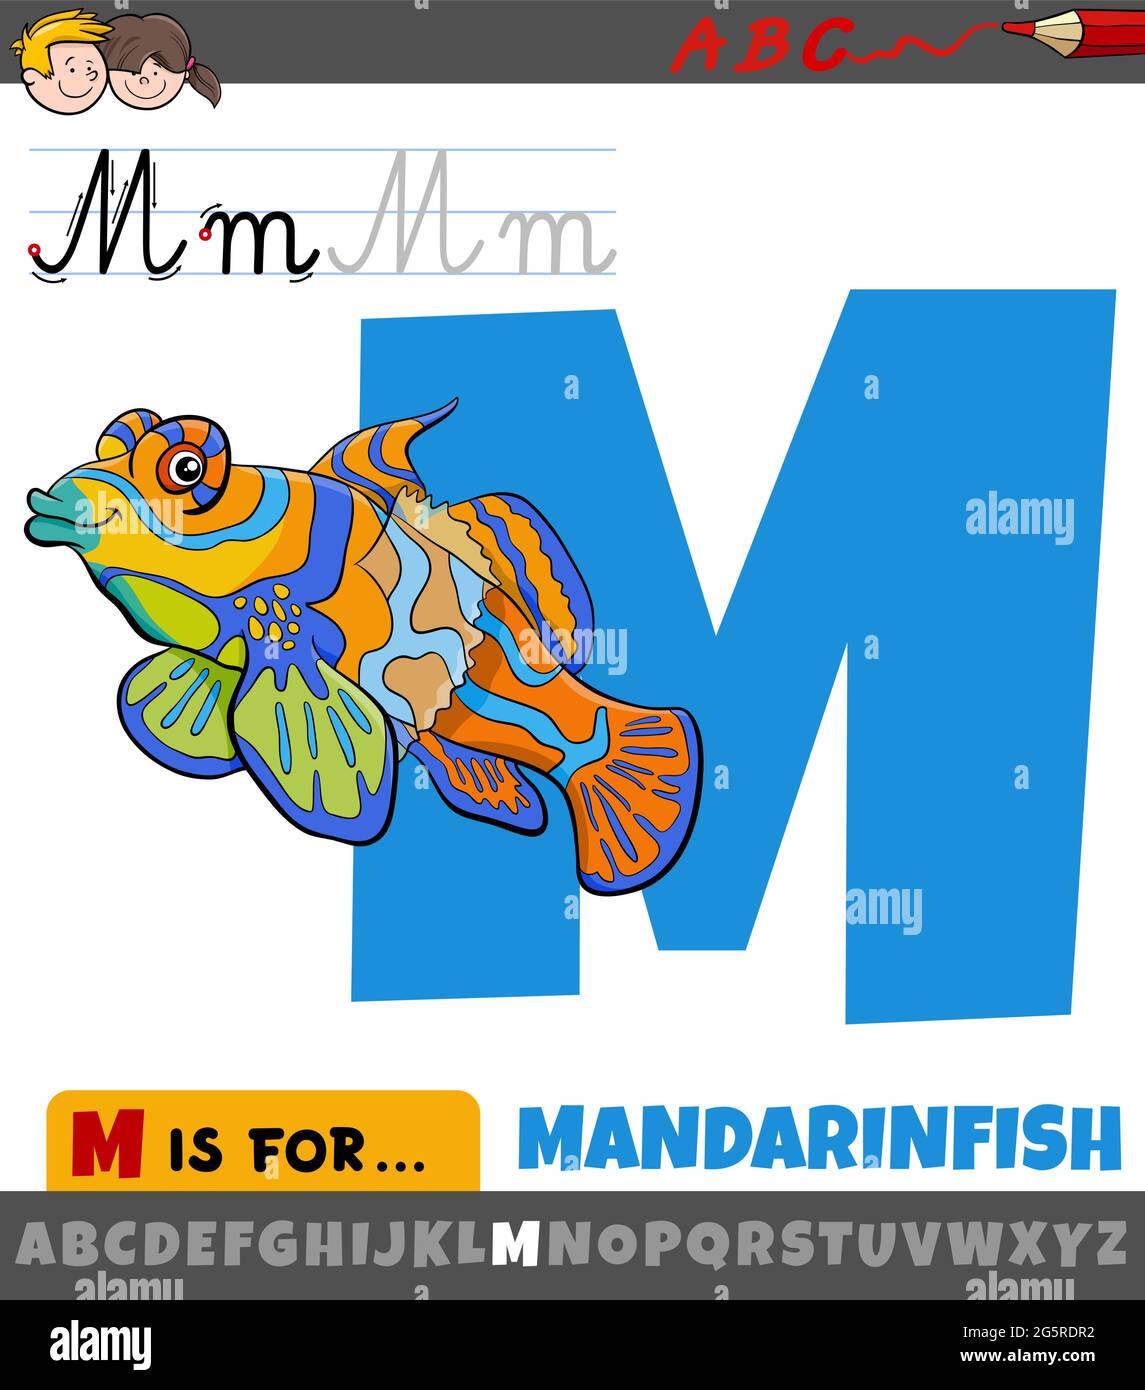 Educational cartoon illustration of letter M from alphabet with mandarinfish fish animal character Stock Vector